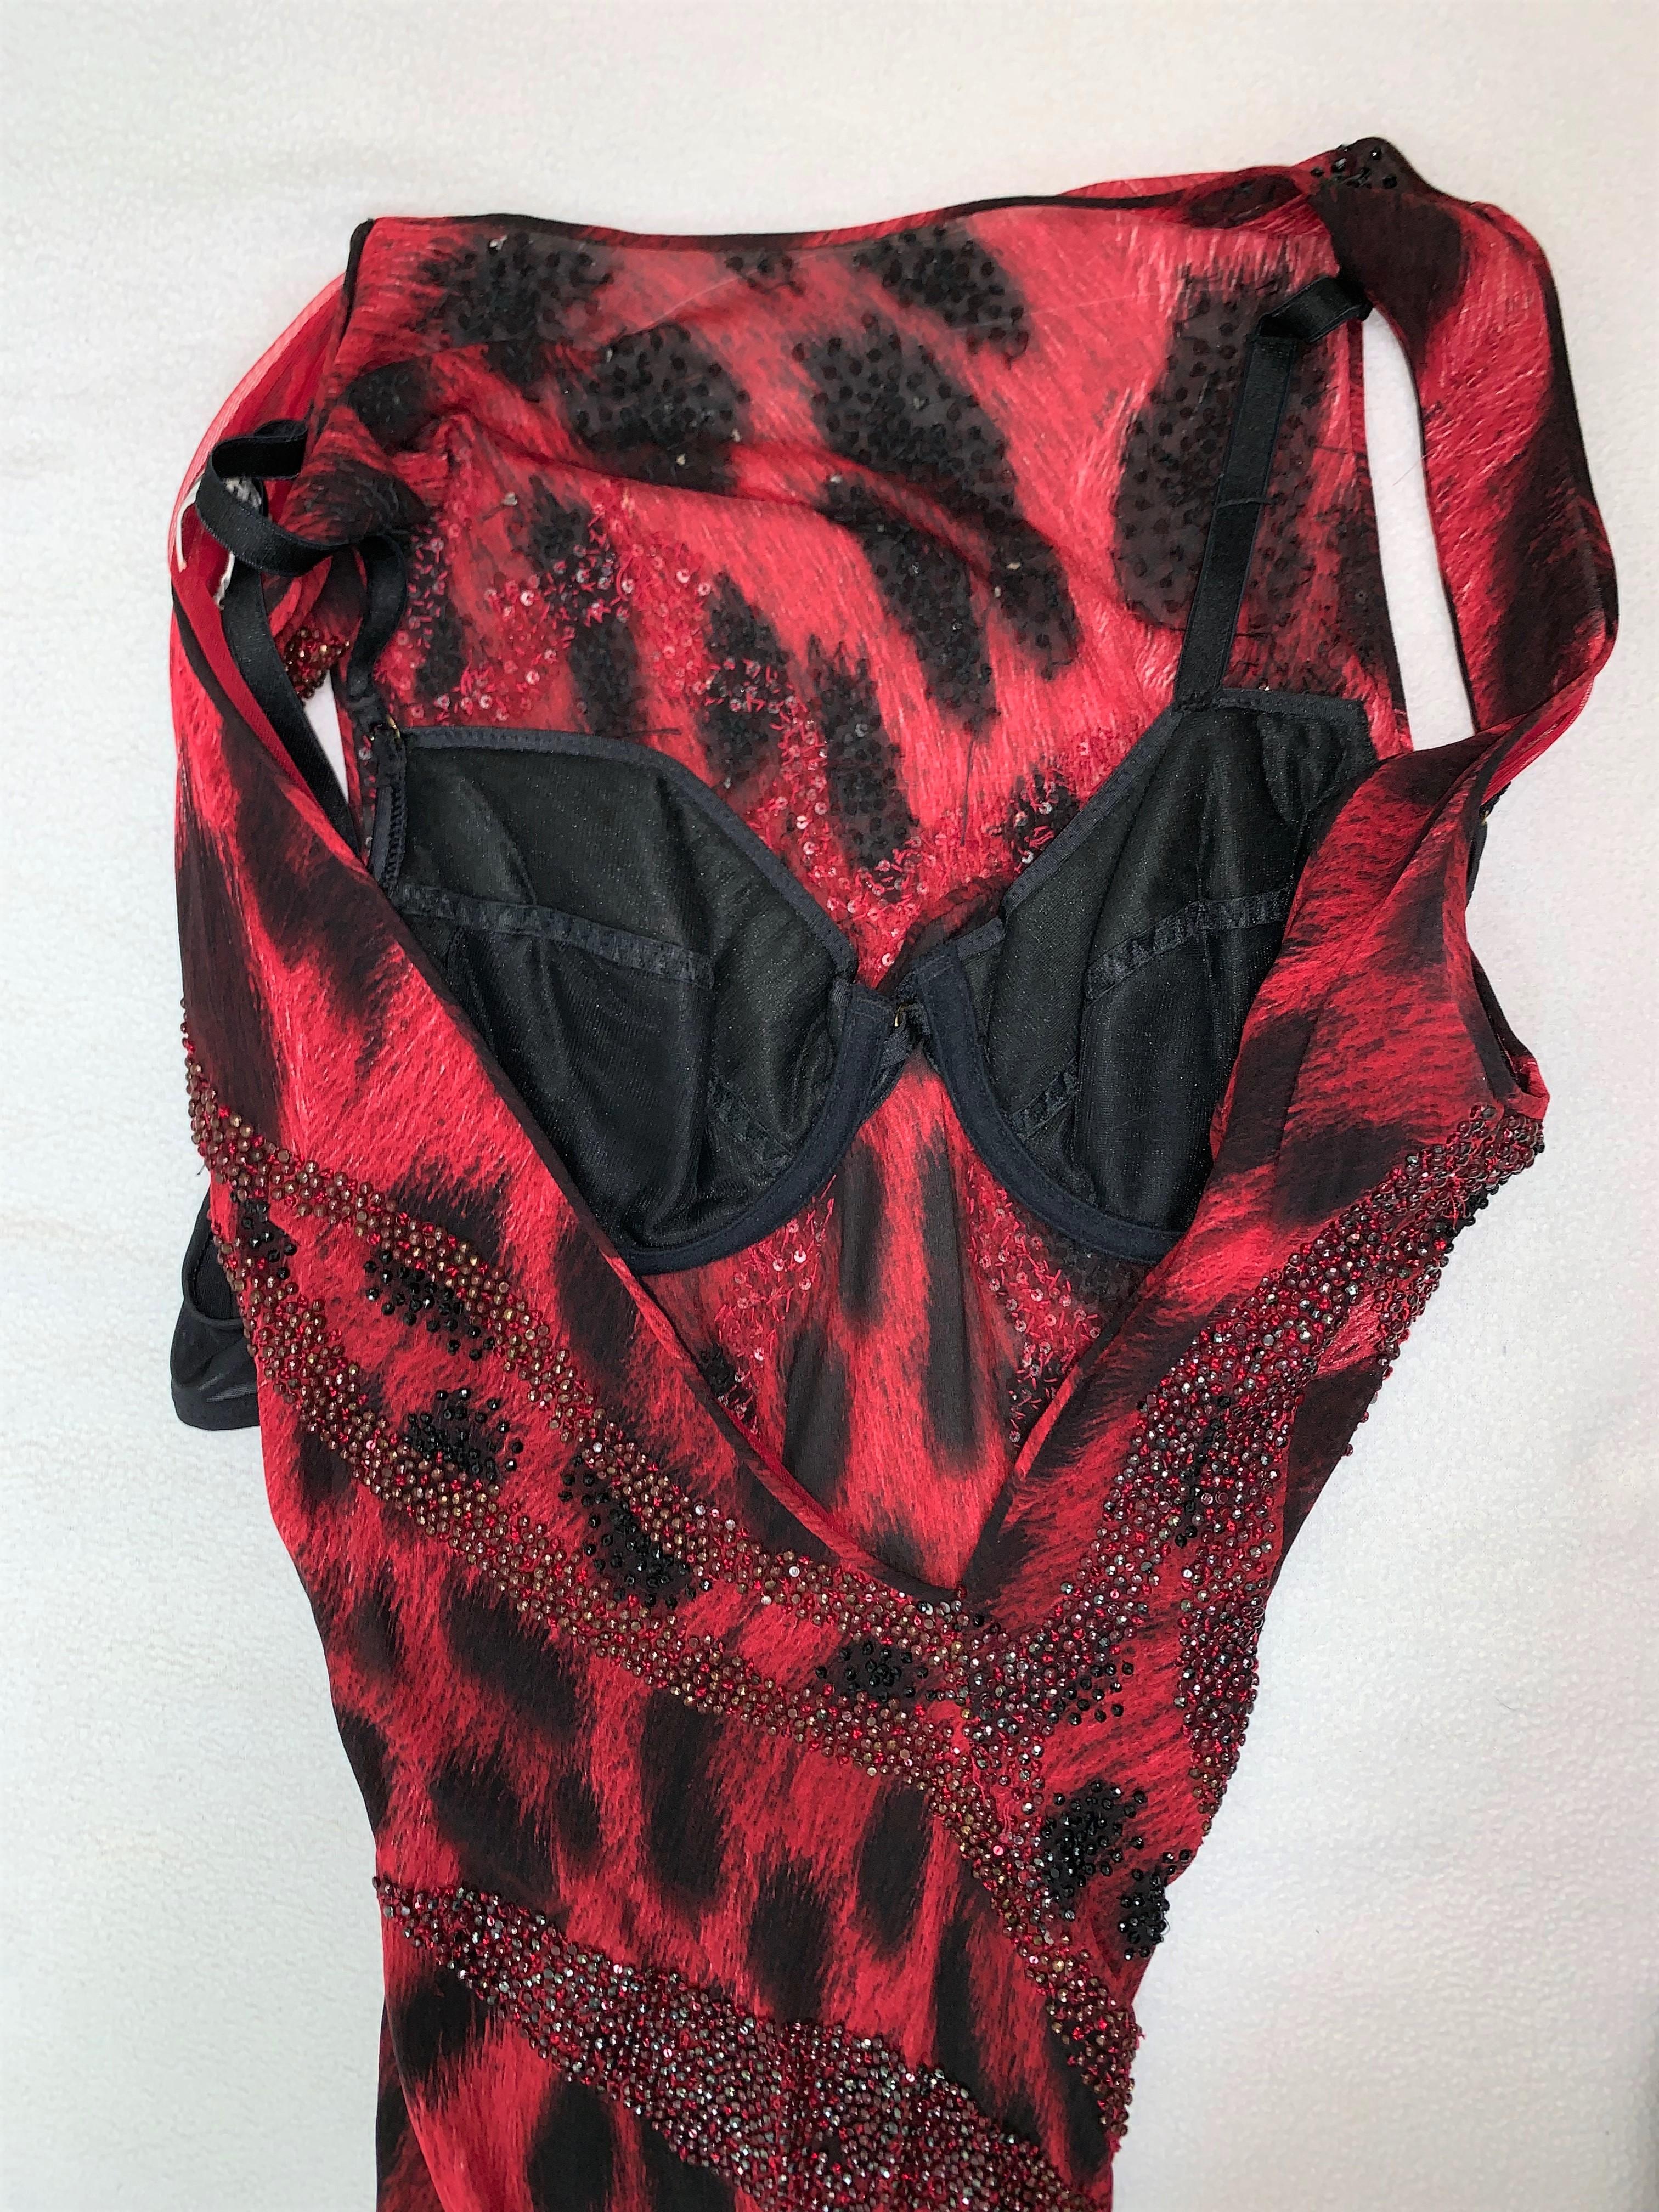 F/W 2001 Atelier Versace Sheer Red & Black Leopard Beaded Gown Dress In Good Condition In Yukon, OK